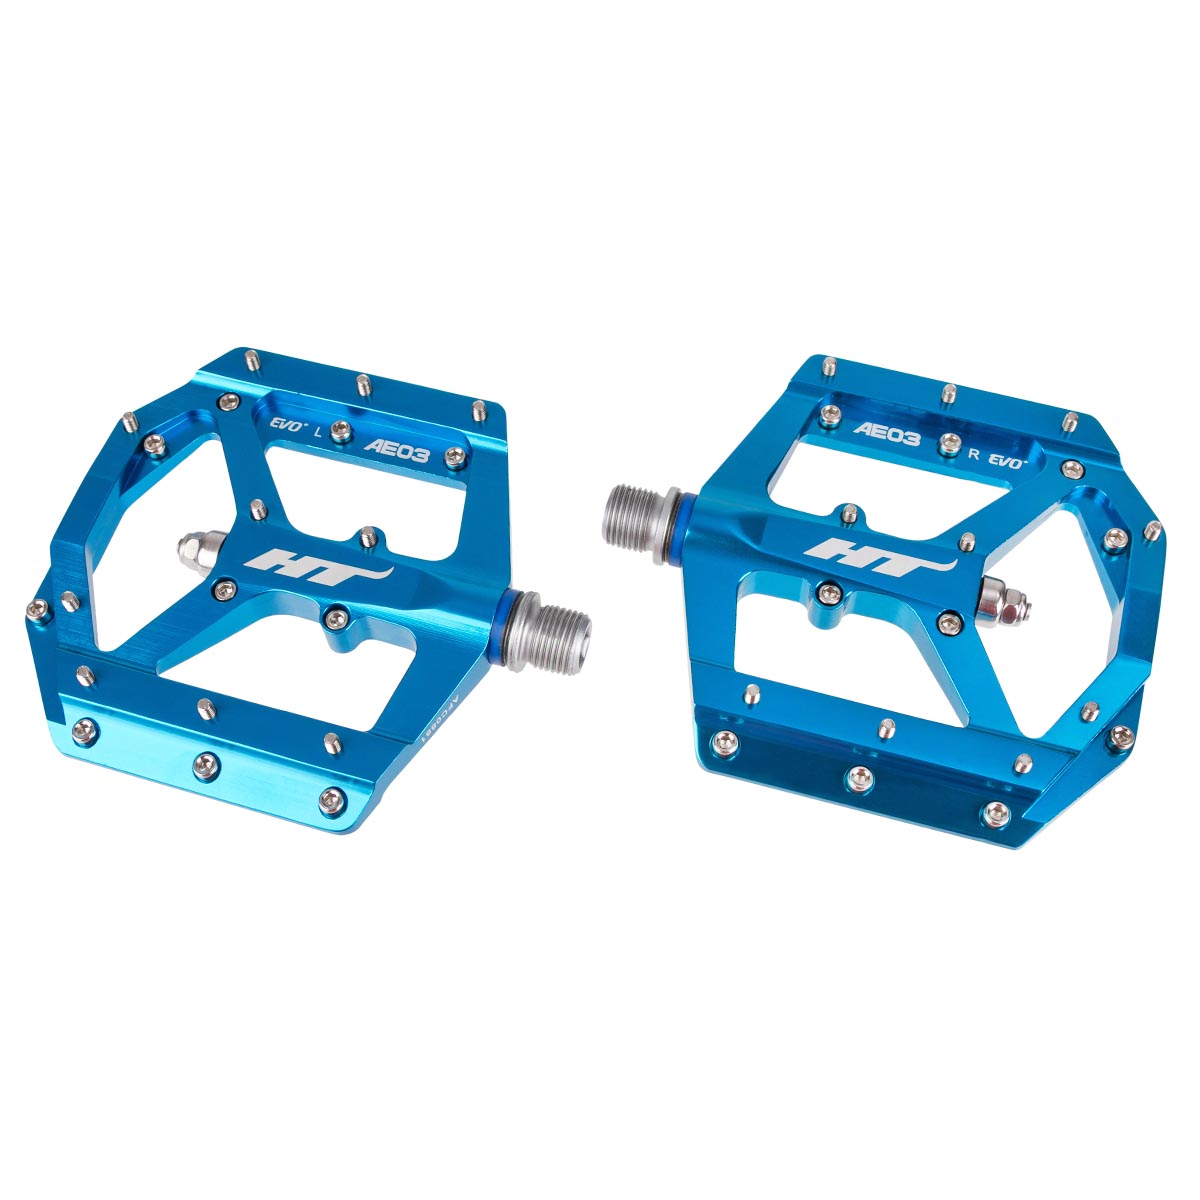 HT Components Pedals AE03 Sky Blue